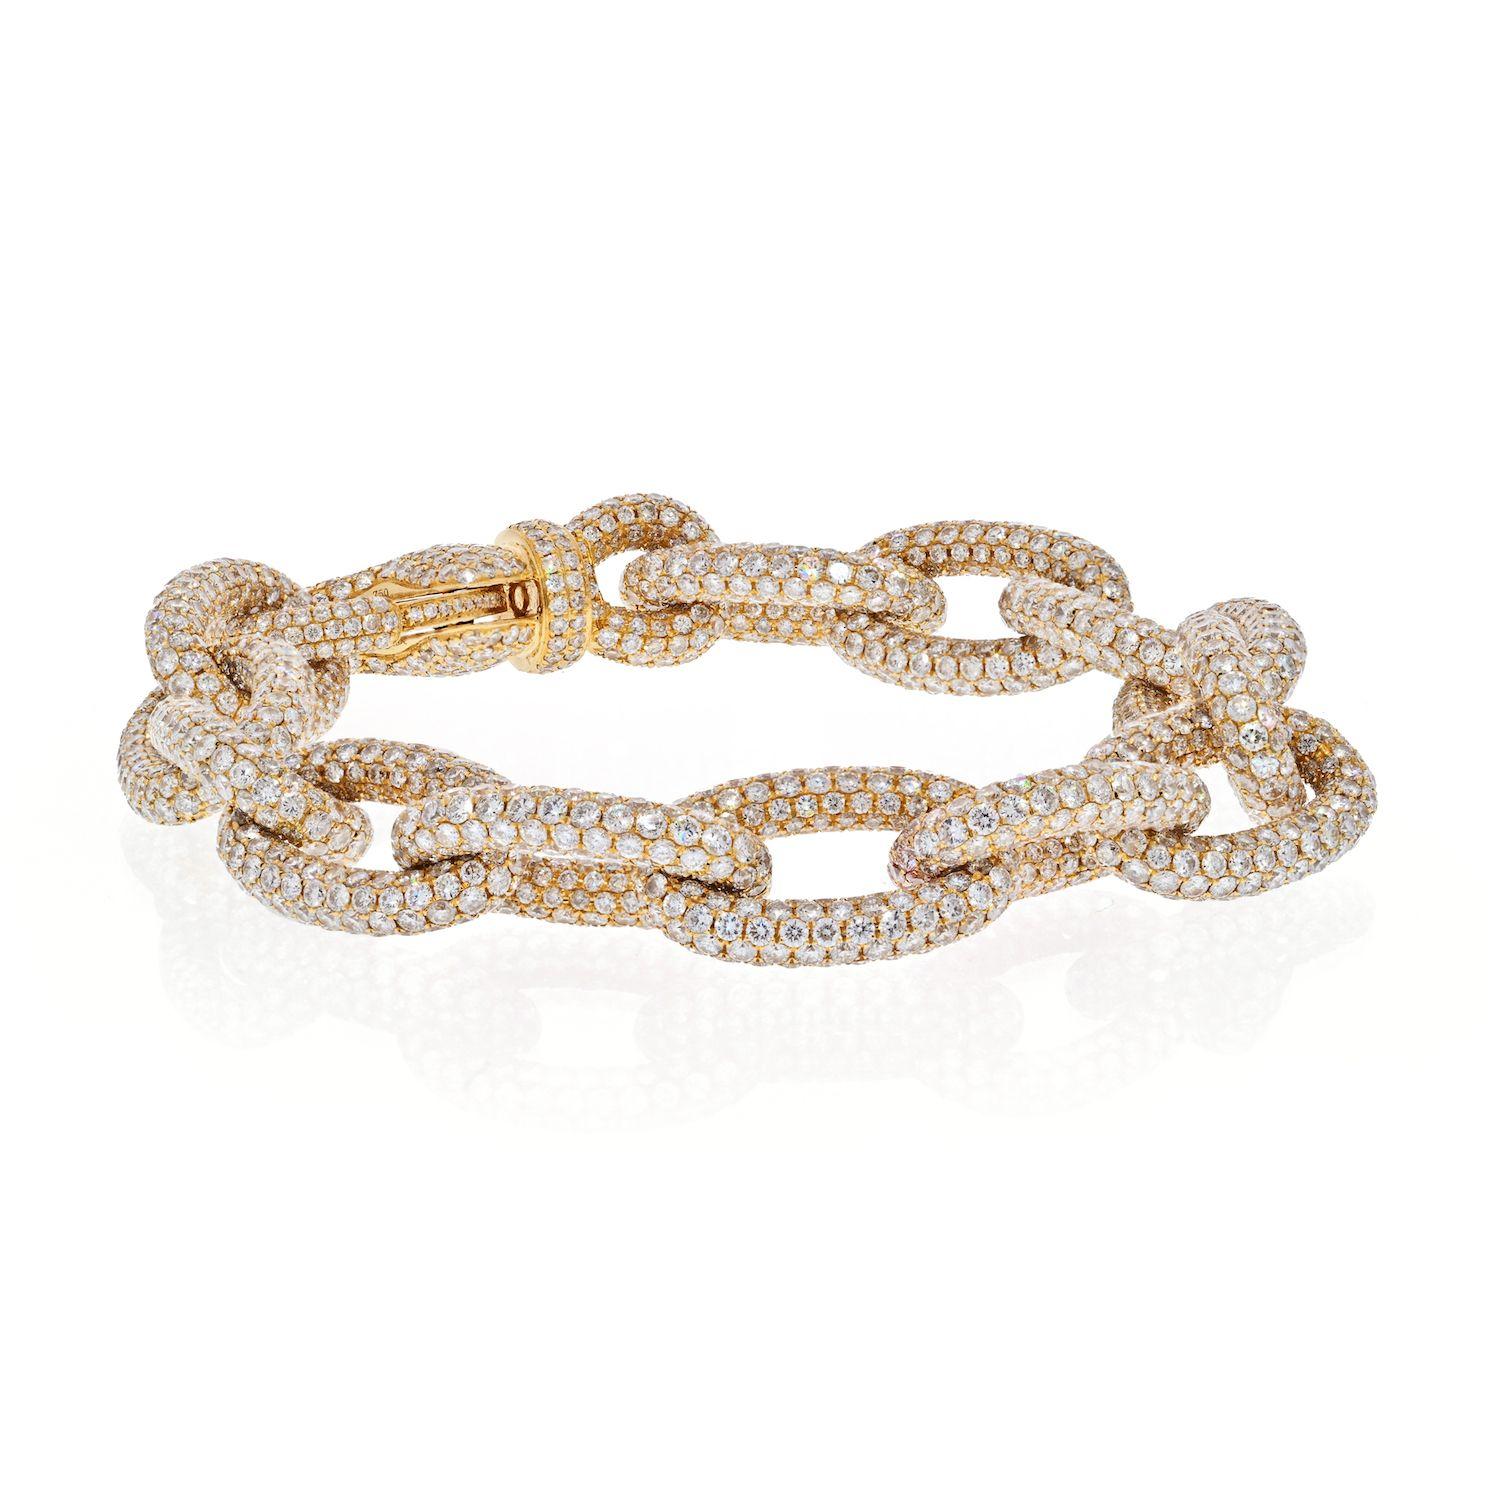 Absolutely stunning this is a must have diamond bracelet.
Made in 18K Yellow Gold munted with round brilliant cut diamonds of 35 cttw.
Style: Opel Link Pave Set 
Diamond Quality: F-G color, VS-SI clarity.
Length: 8 inches.